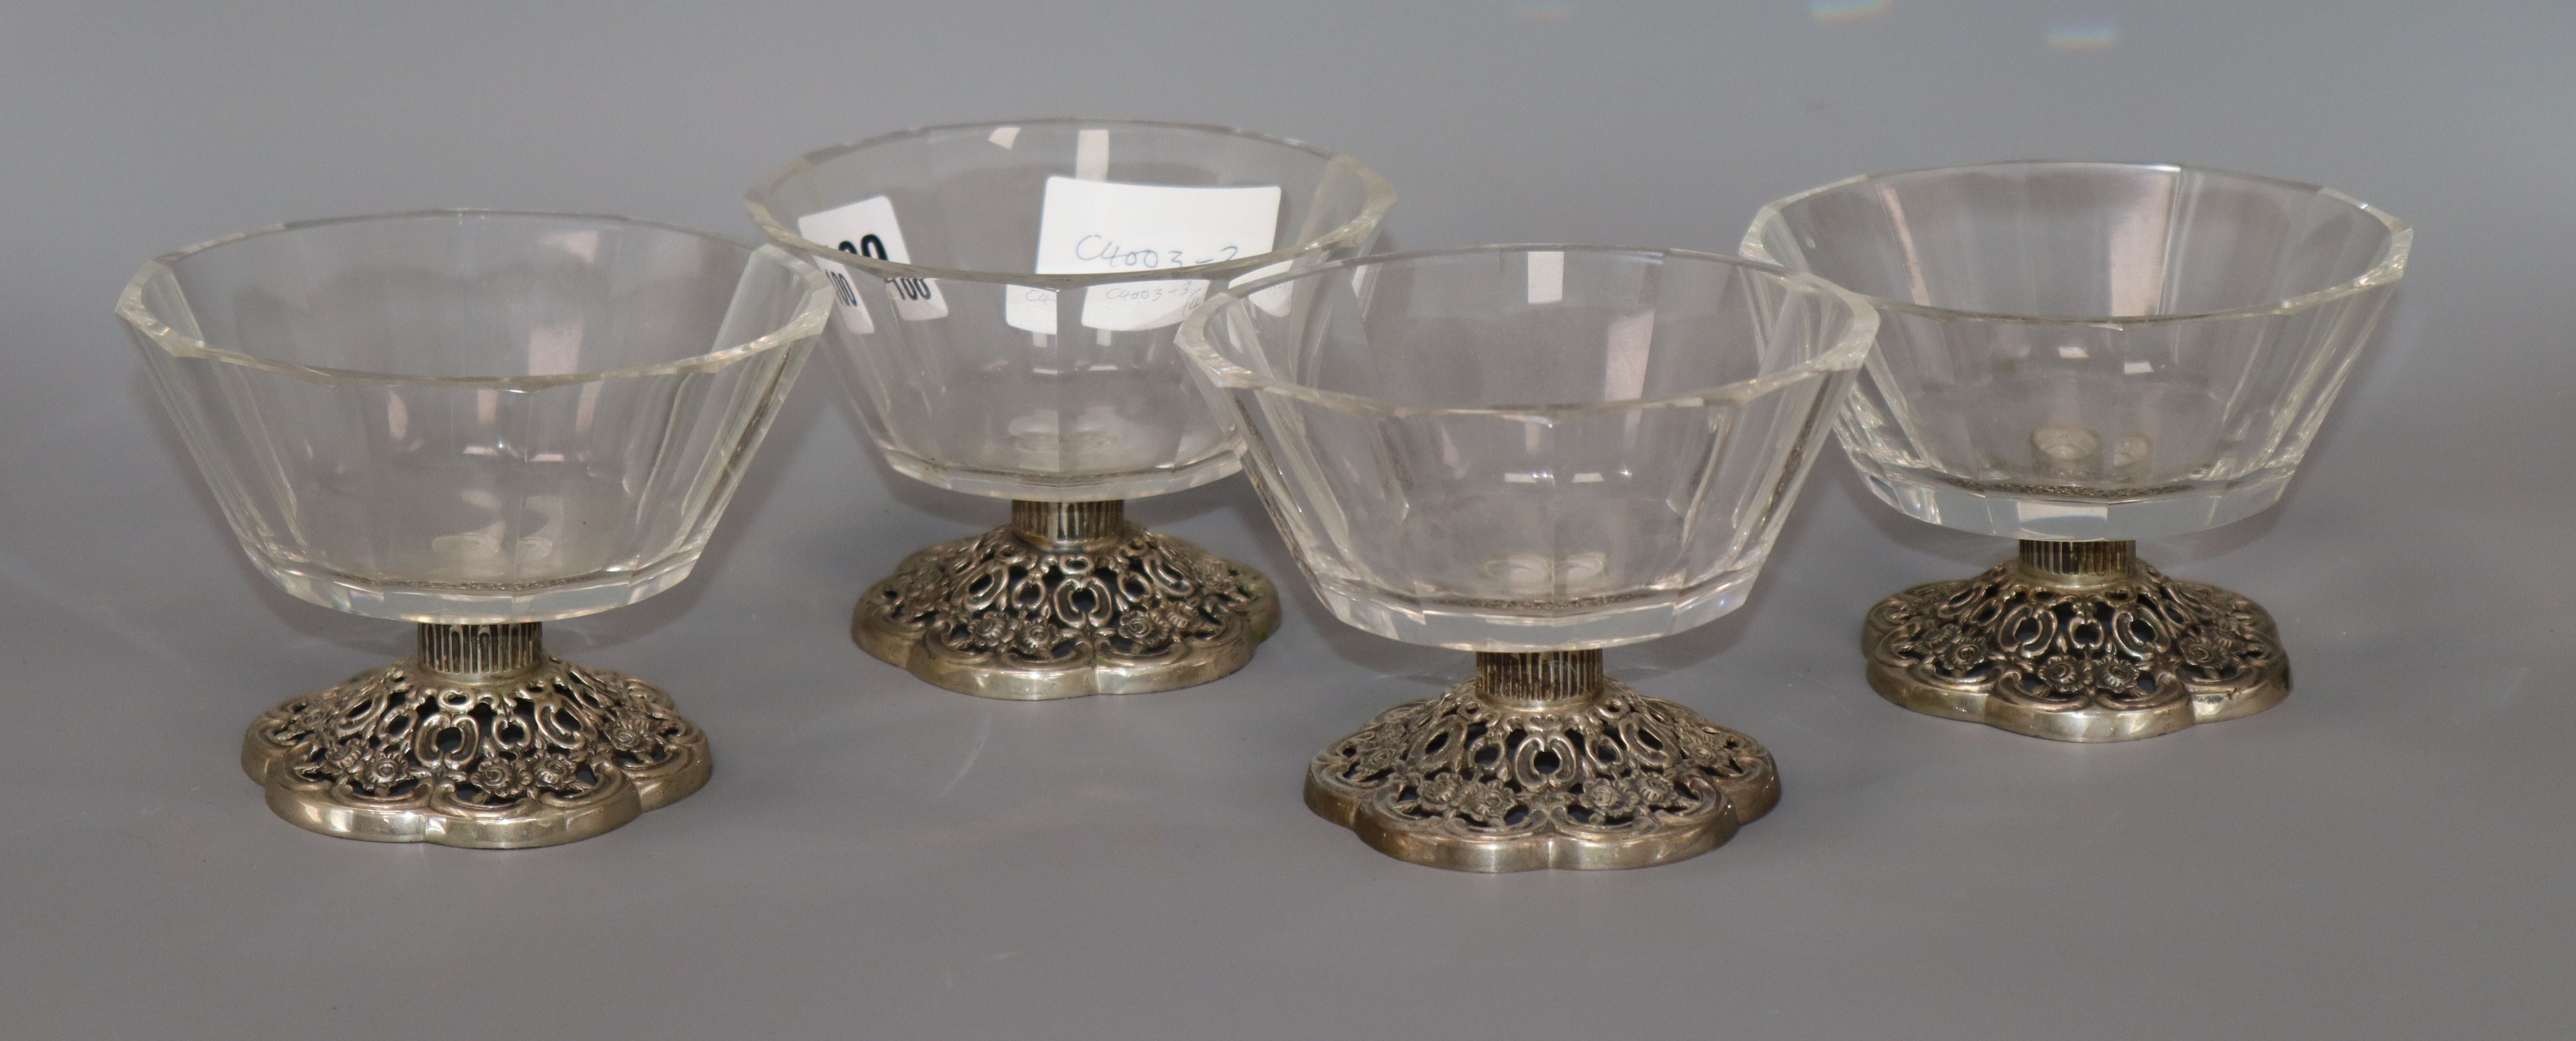 A set of four 835 white metal and glass dessert bowls, possibly by Villeroy & Boch